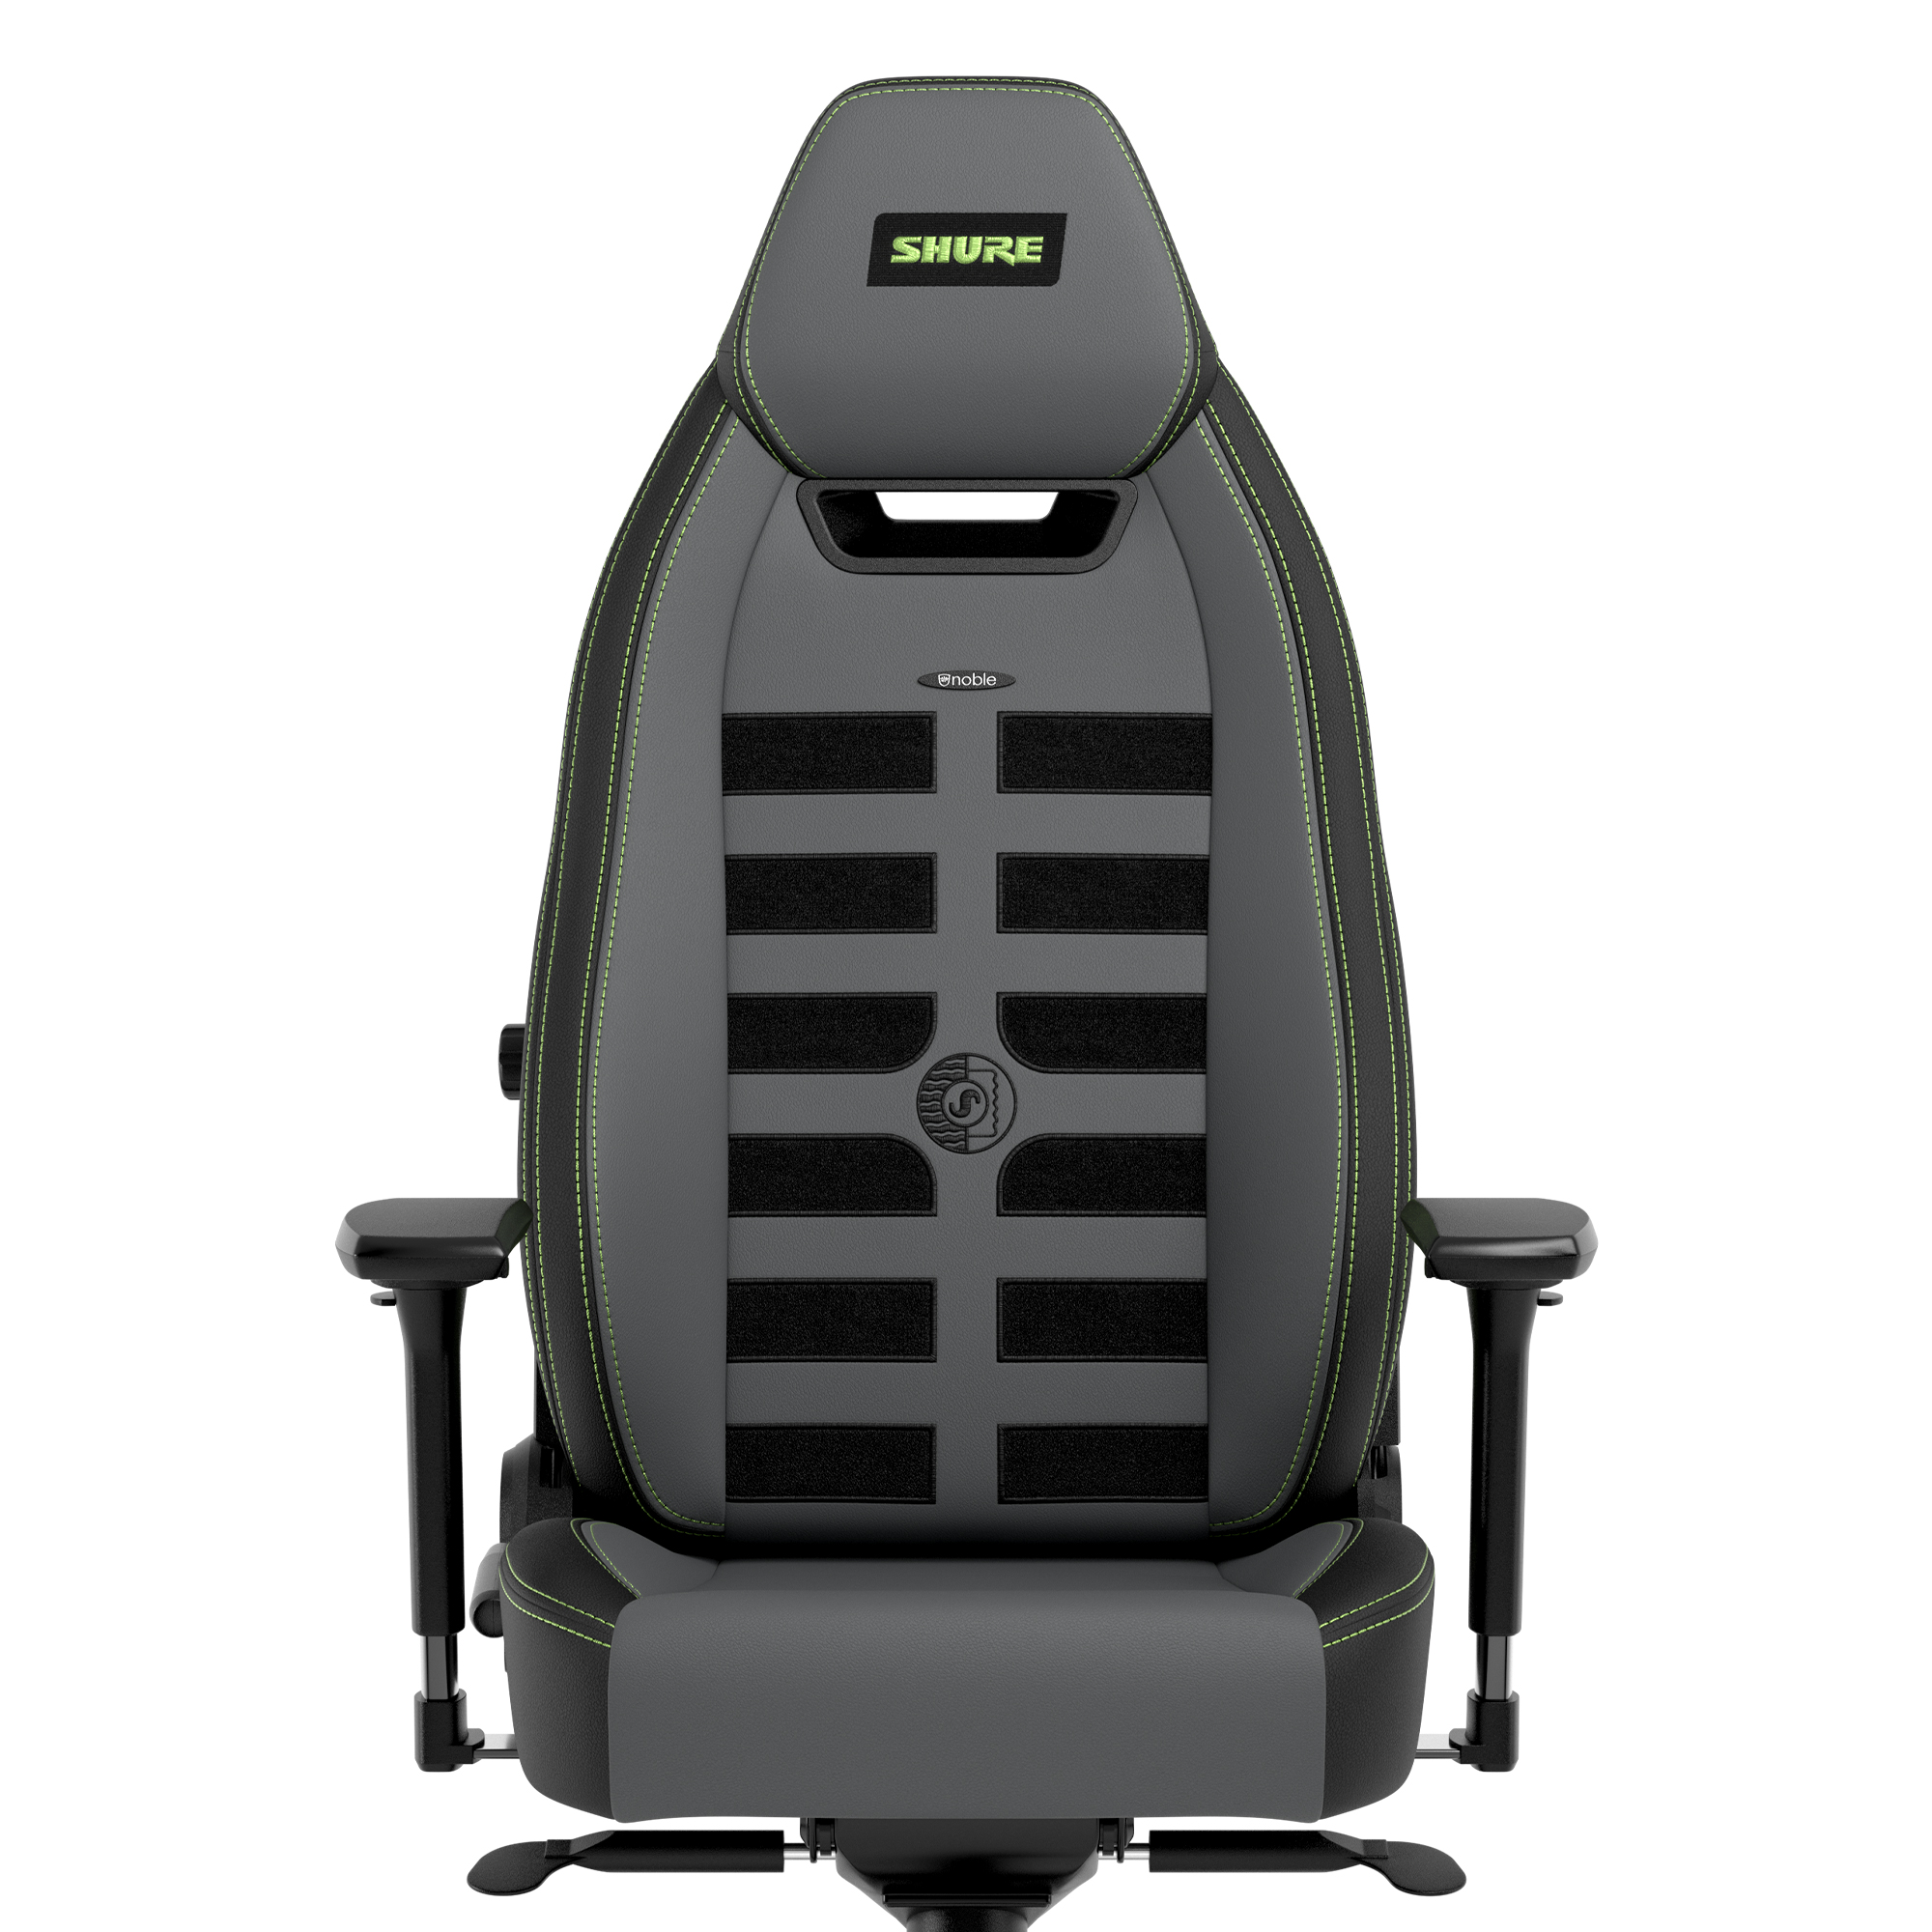 noblechairs - noblechairs LEGEND Gaming Chair - Shure Edition